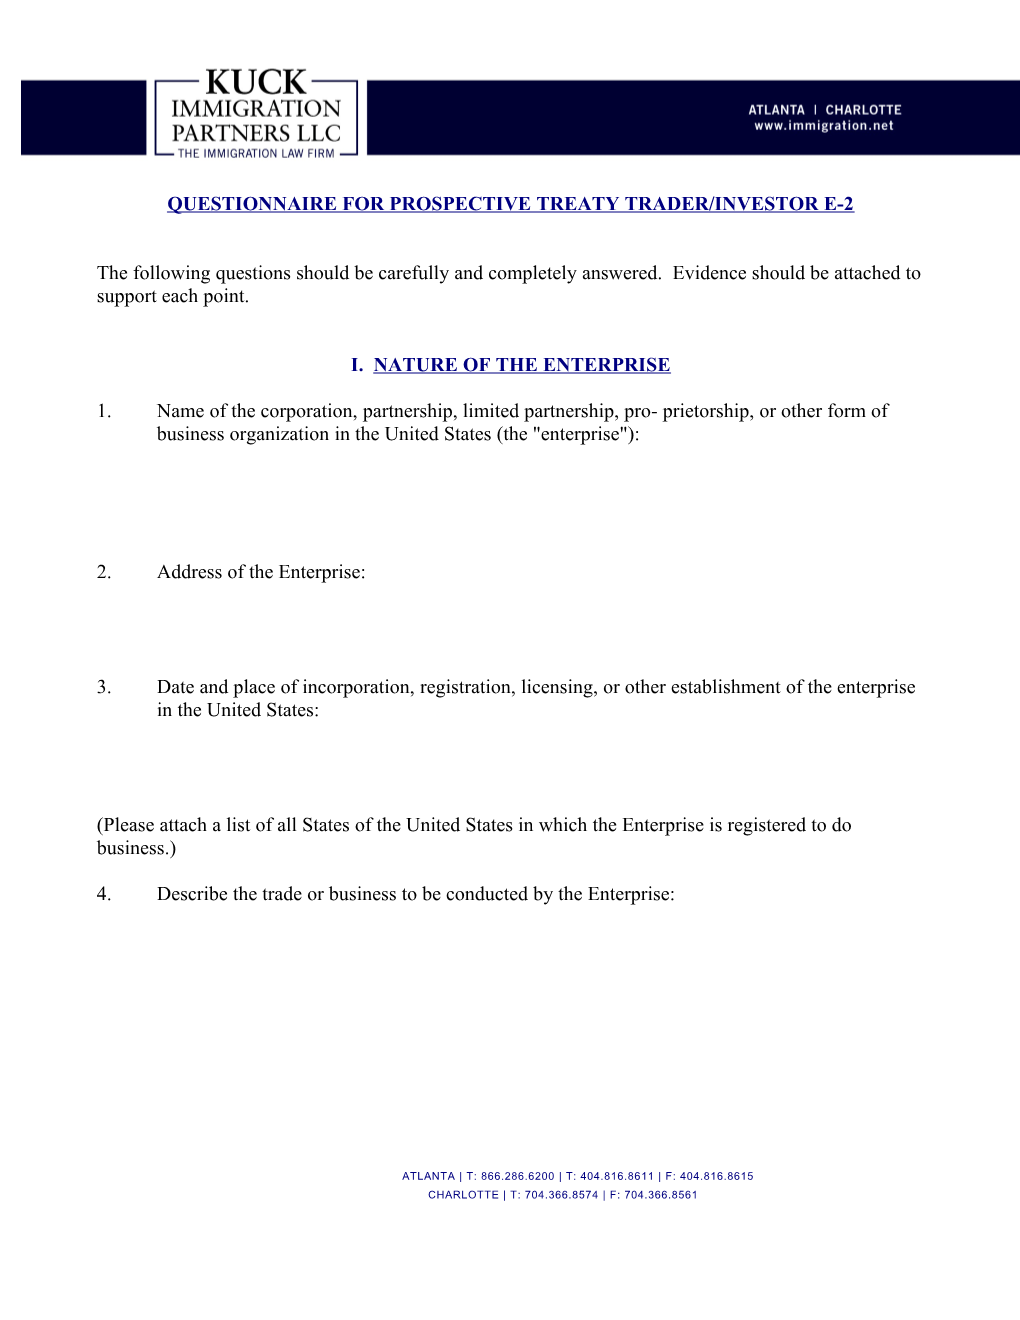 Questionnaire for Prospective Treaty Trader/Investor